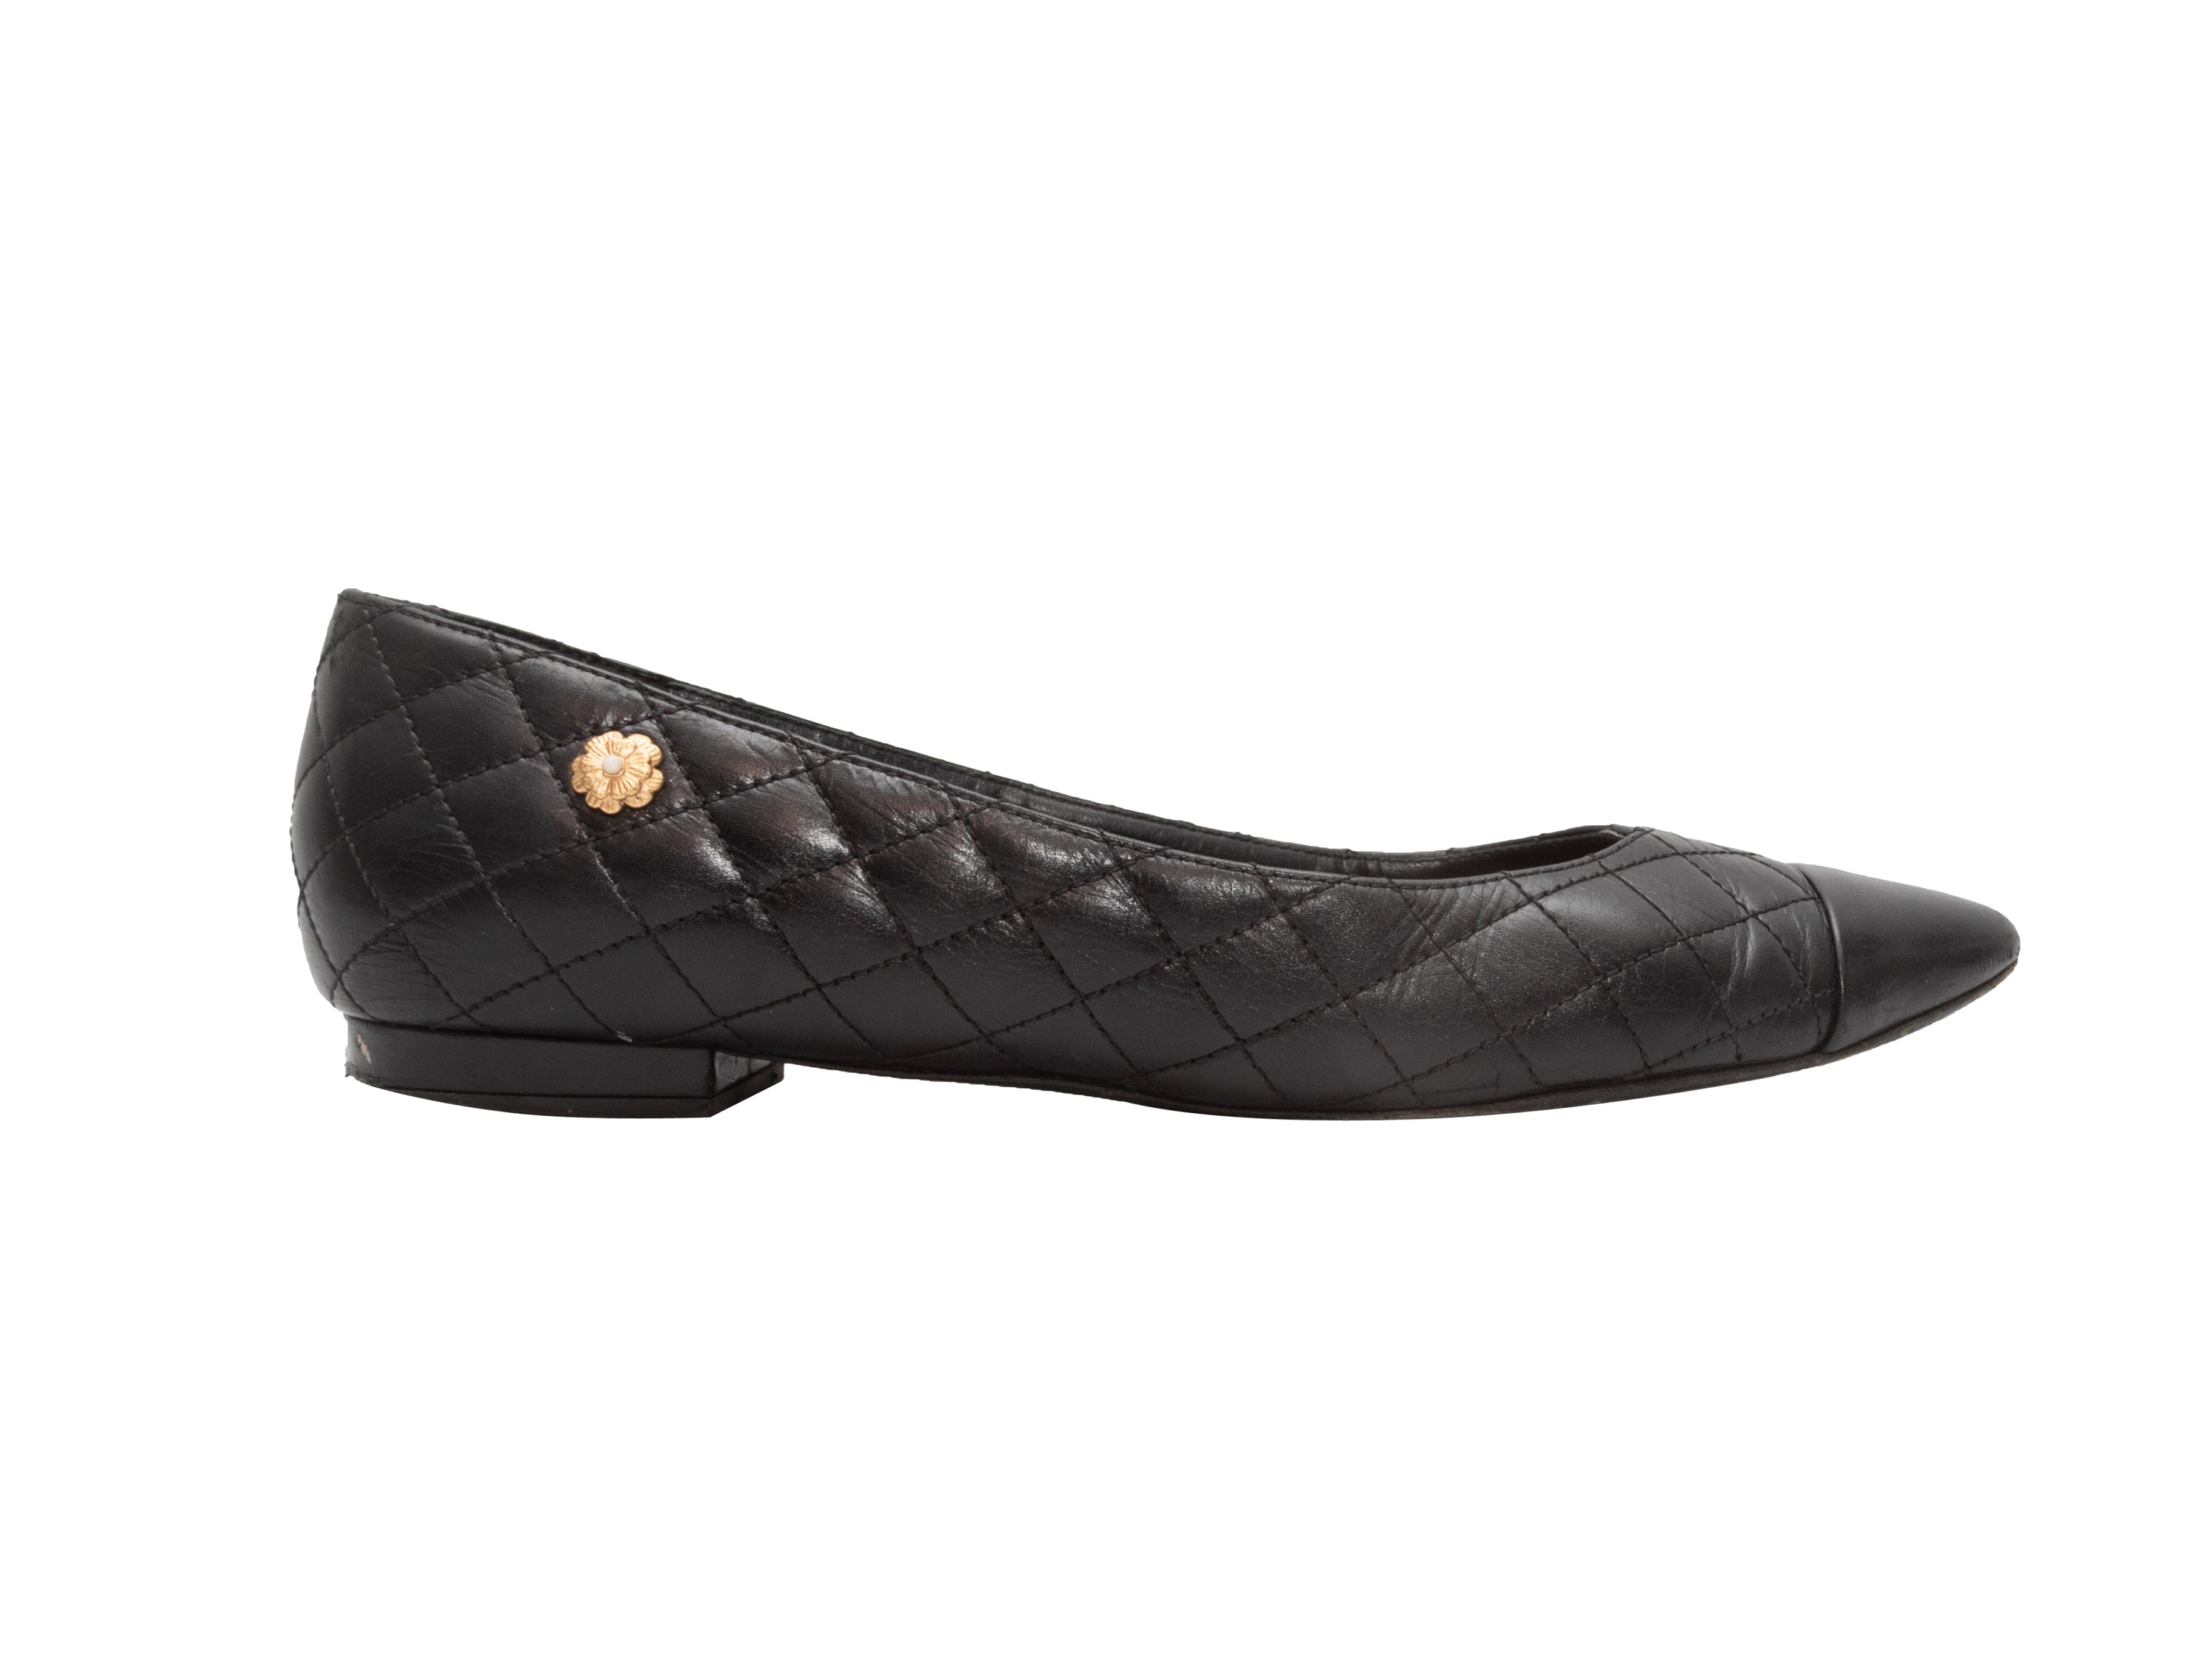 Chanel Slingback Pointed Black Flats Size 36.5 – Coco Approved Studio